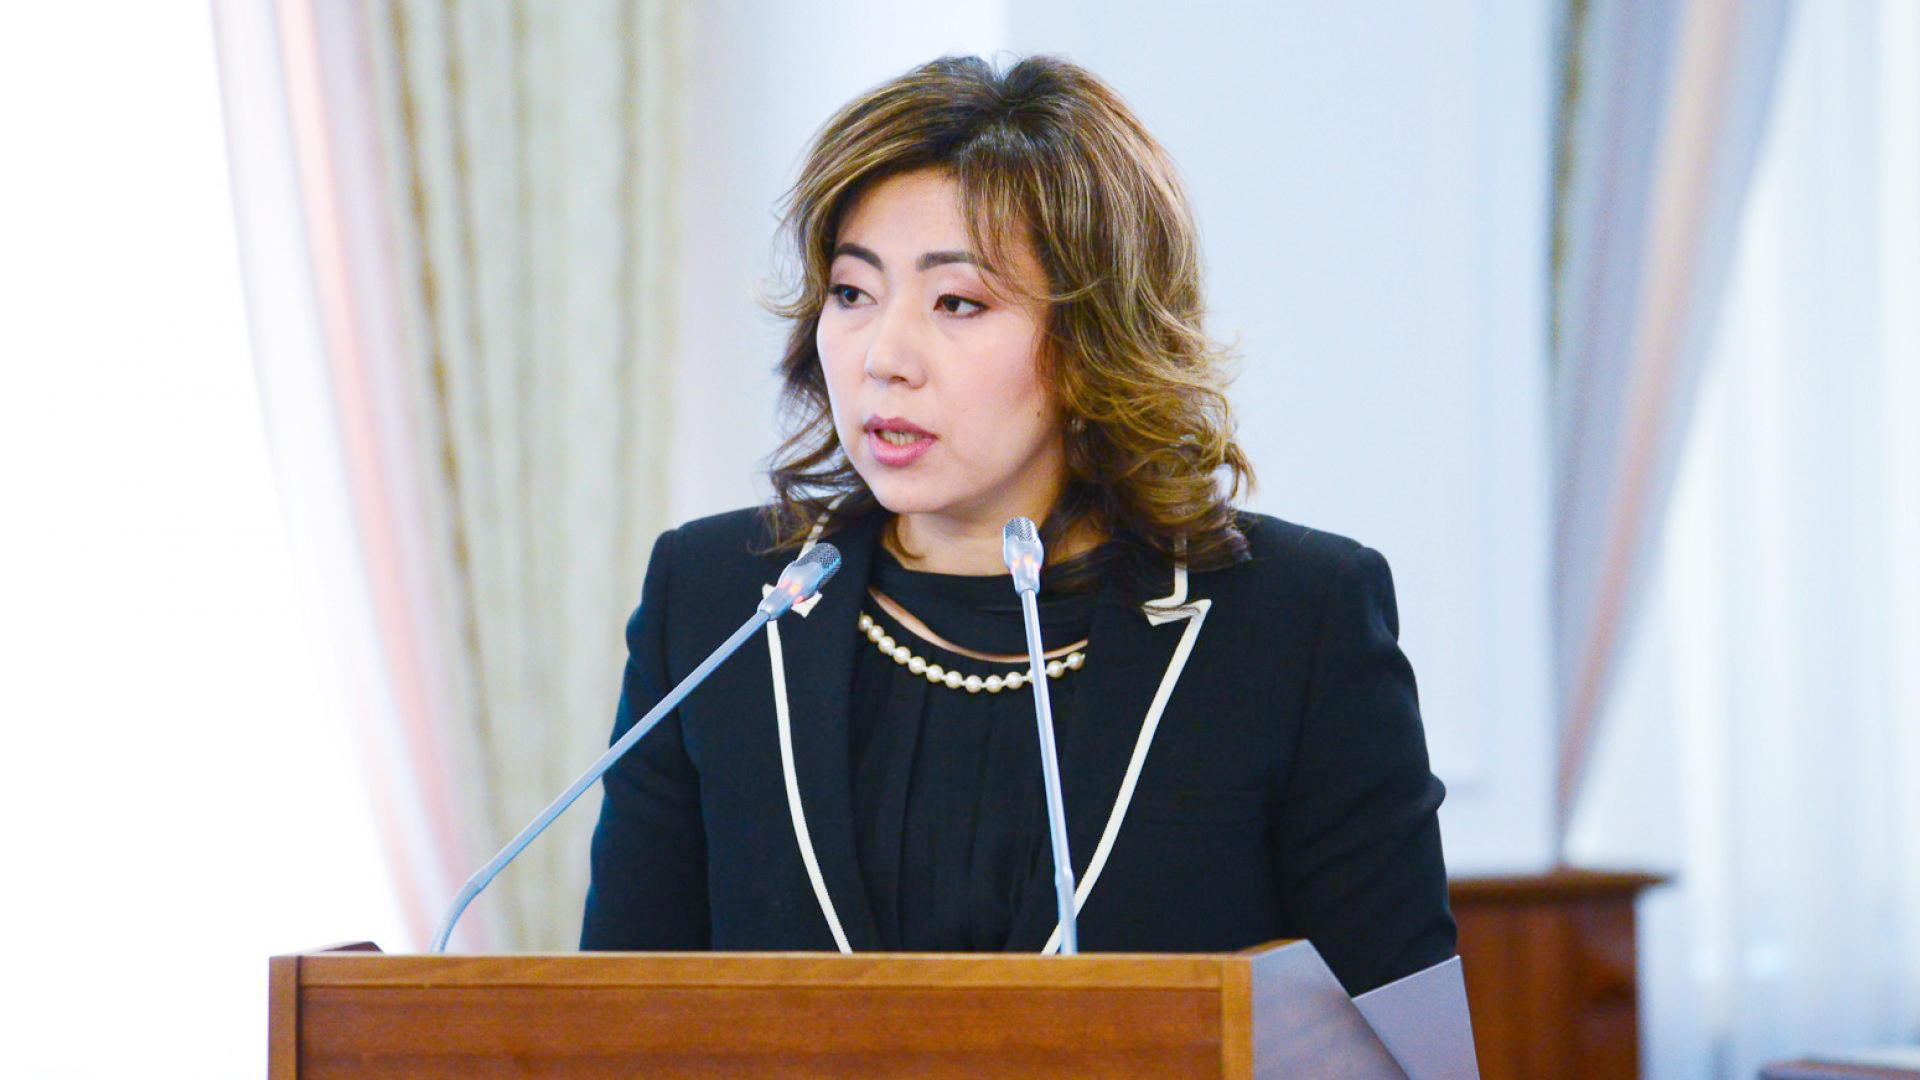 SMEs can apply for new loan deferral — Madina Abylkassymova